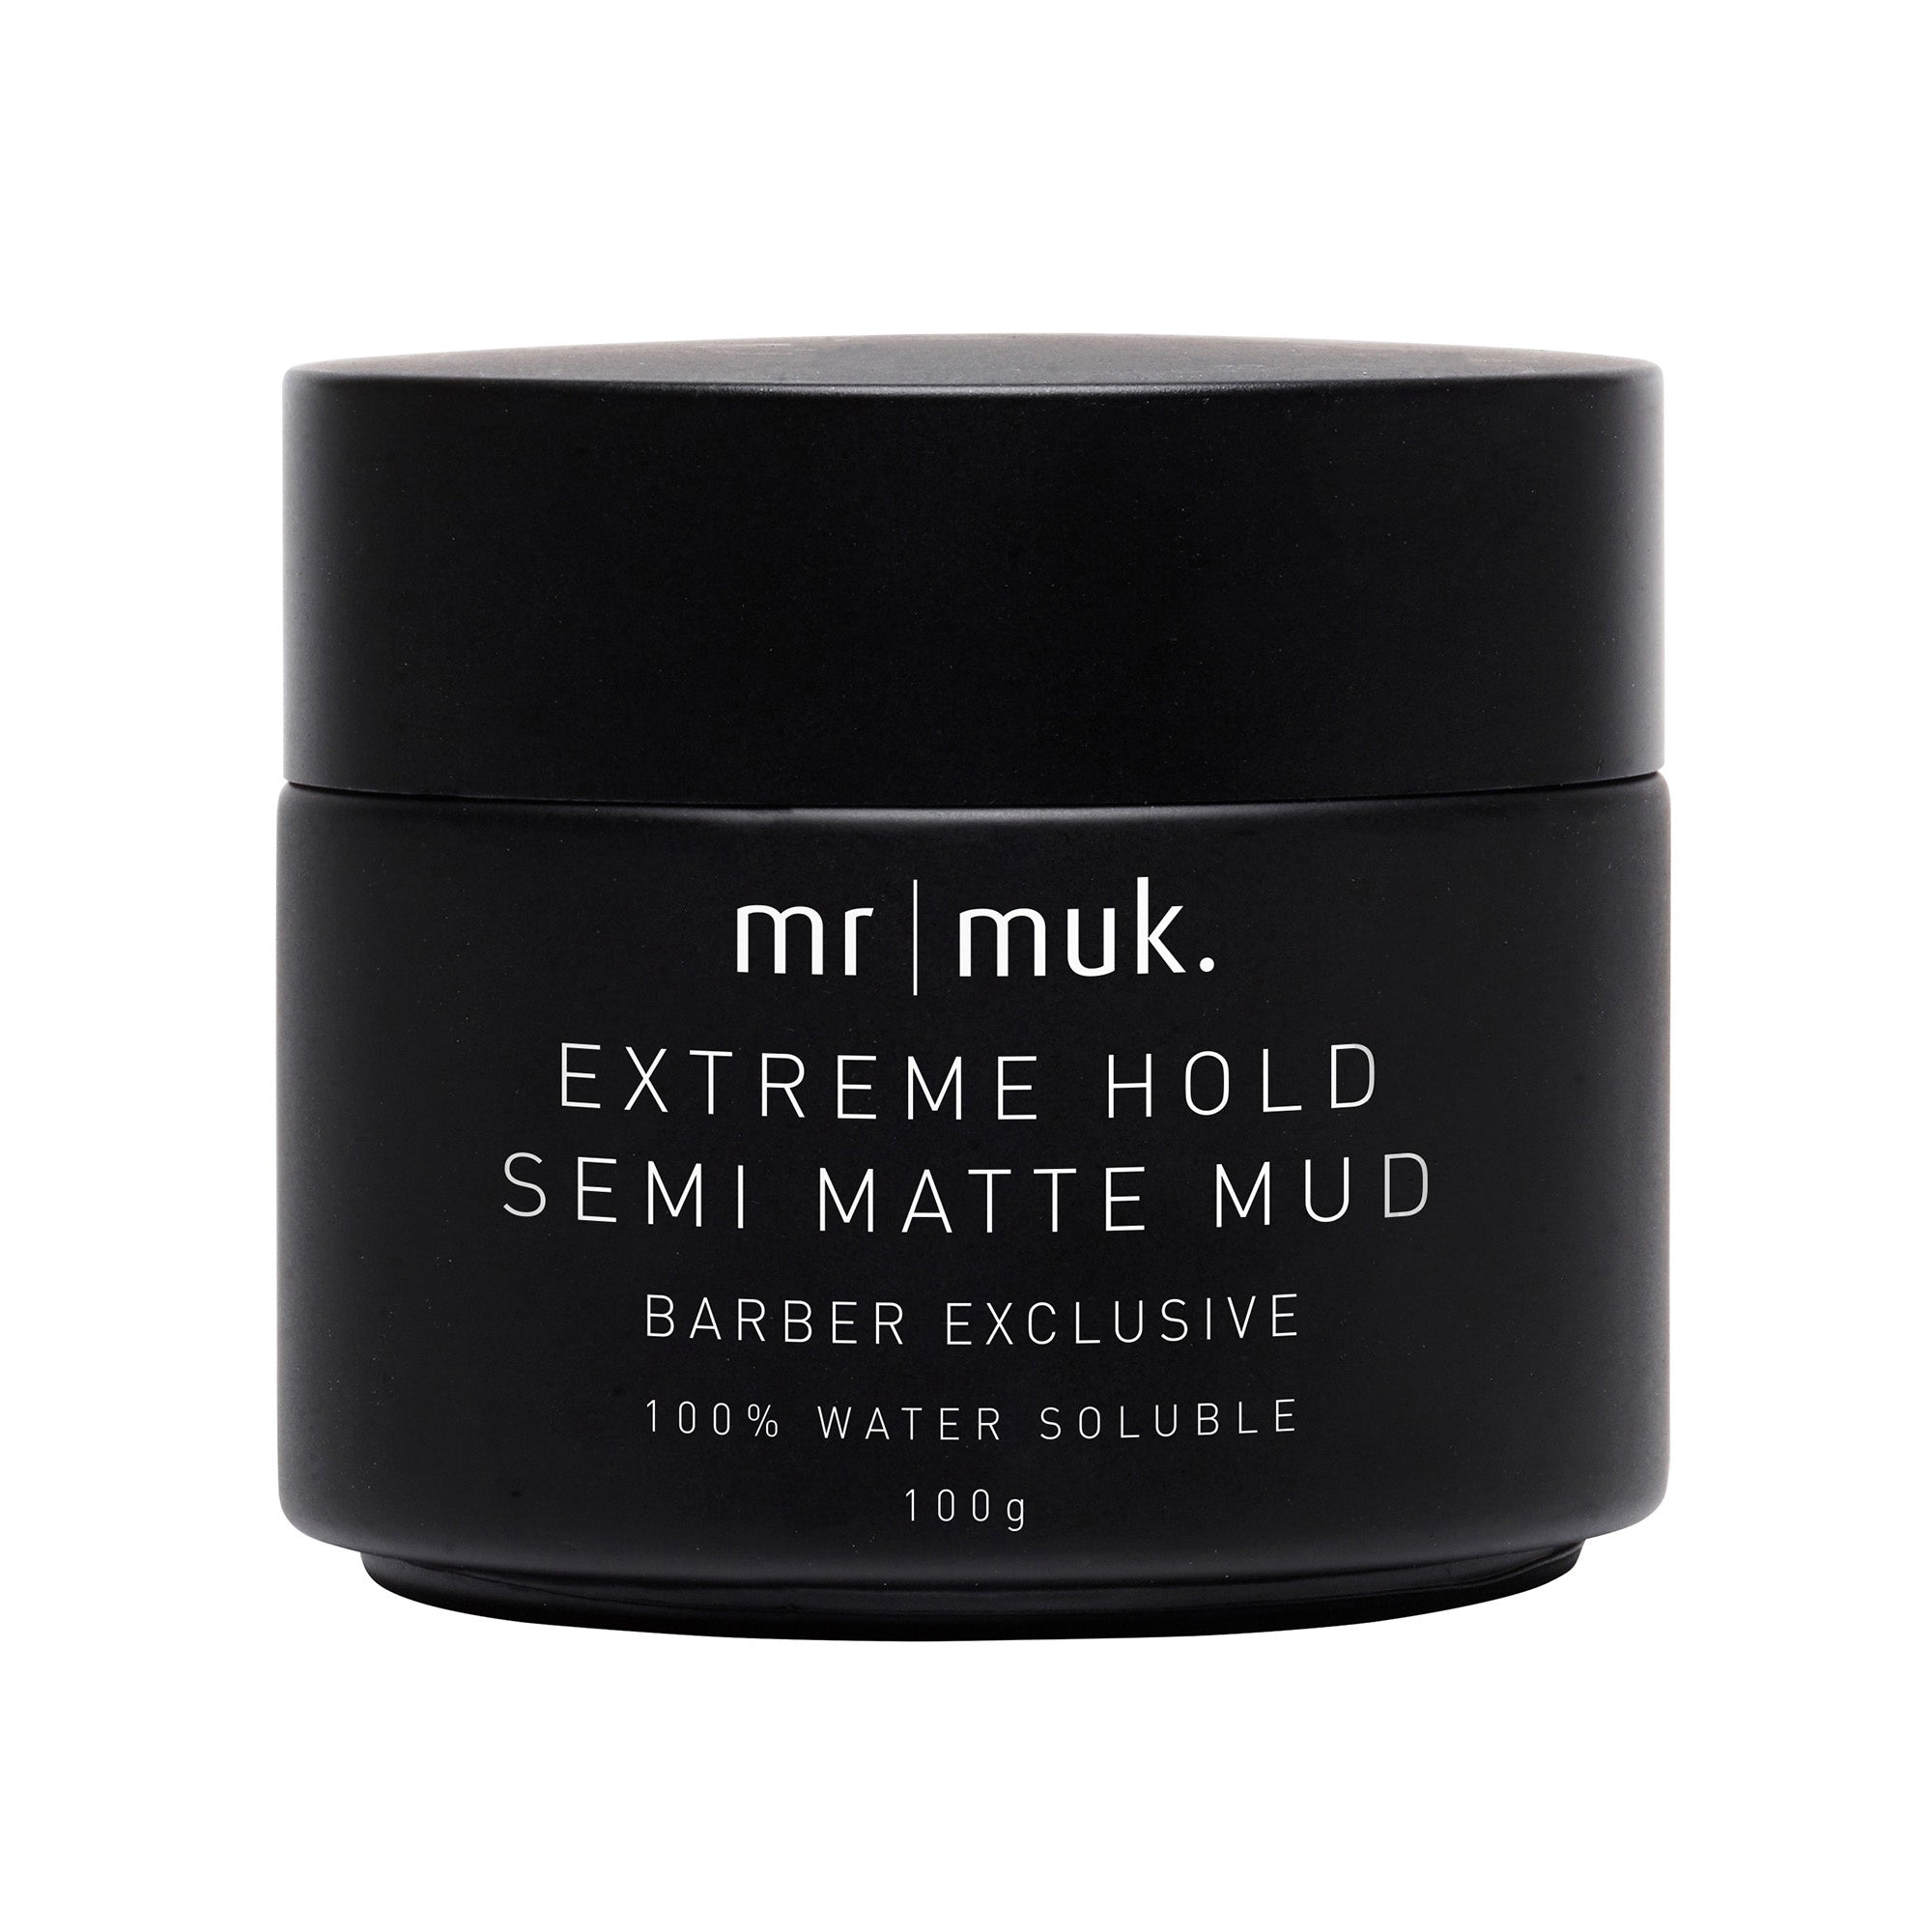 Mr Muk Extreme Hold Semi Matte Mud is a moulding paste that gives your hair extreme hold with the flexibility to style with subtle sheen. 